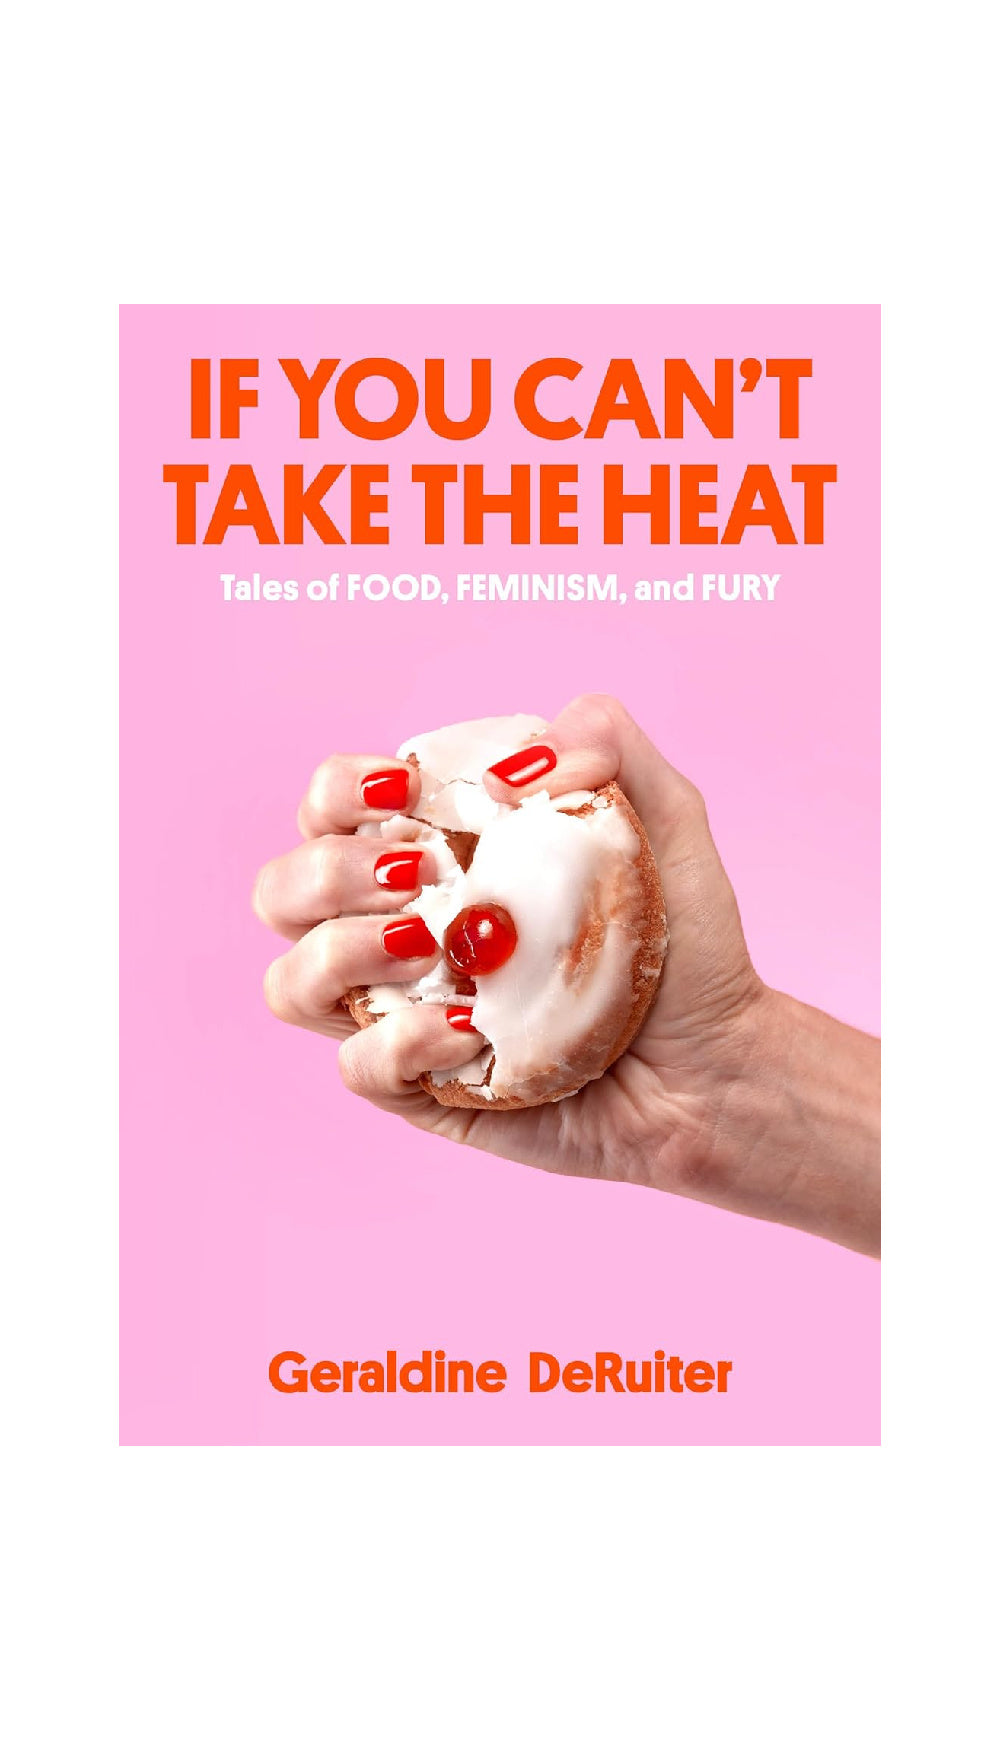 If You Can't Take the Heat: Tales of Food, Feminism, and Fury